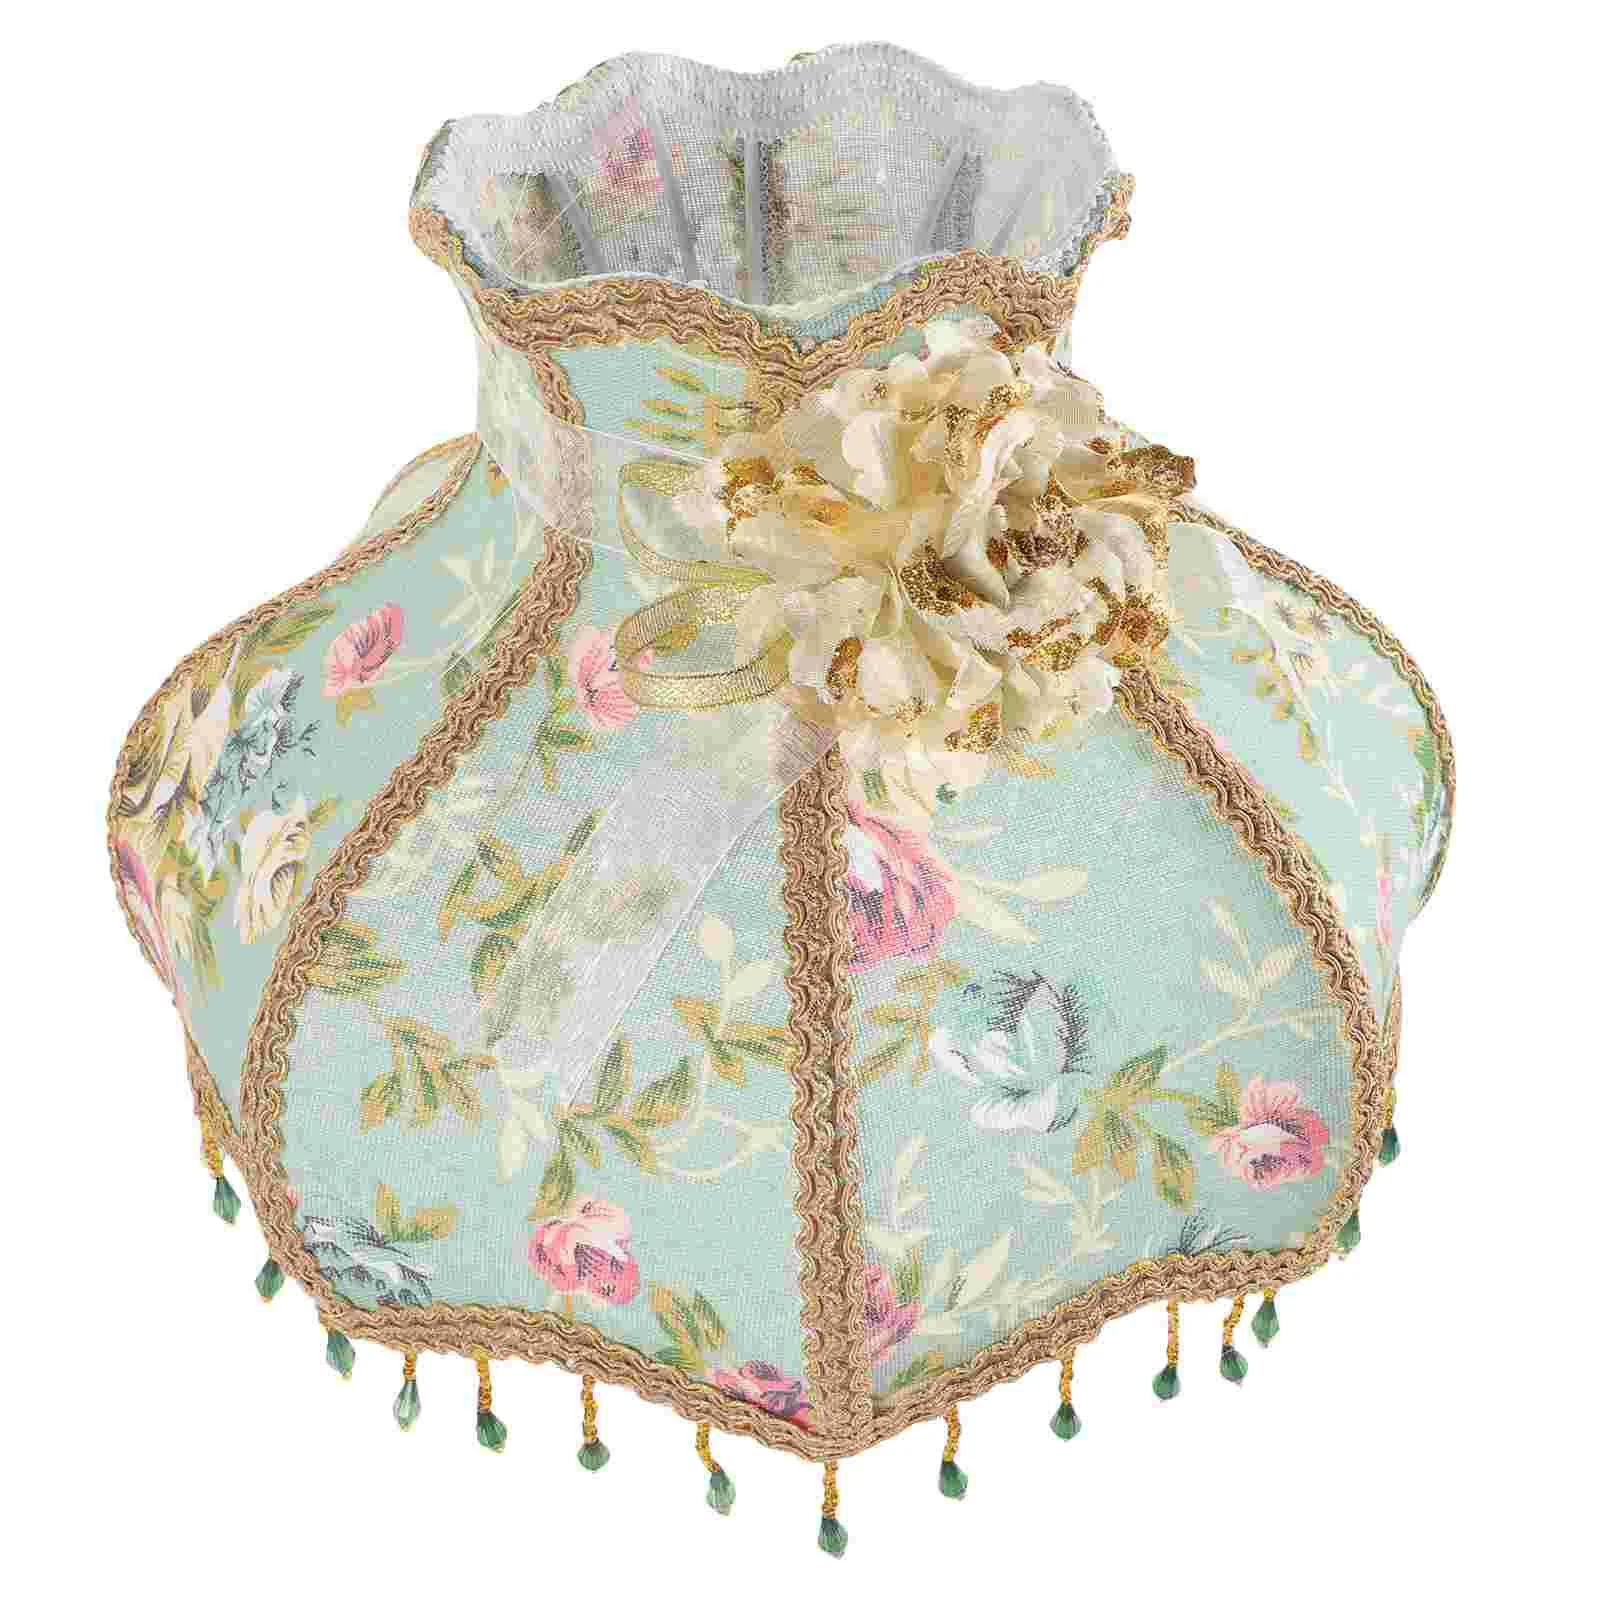 

Vintage Fabric Lamp Shade E27 Royal Scallop Bell Lampshade Replacement Lace Floral Beaded Light Shade Table Beside